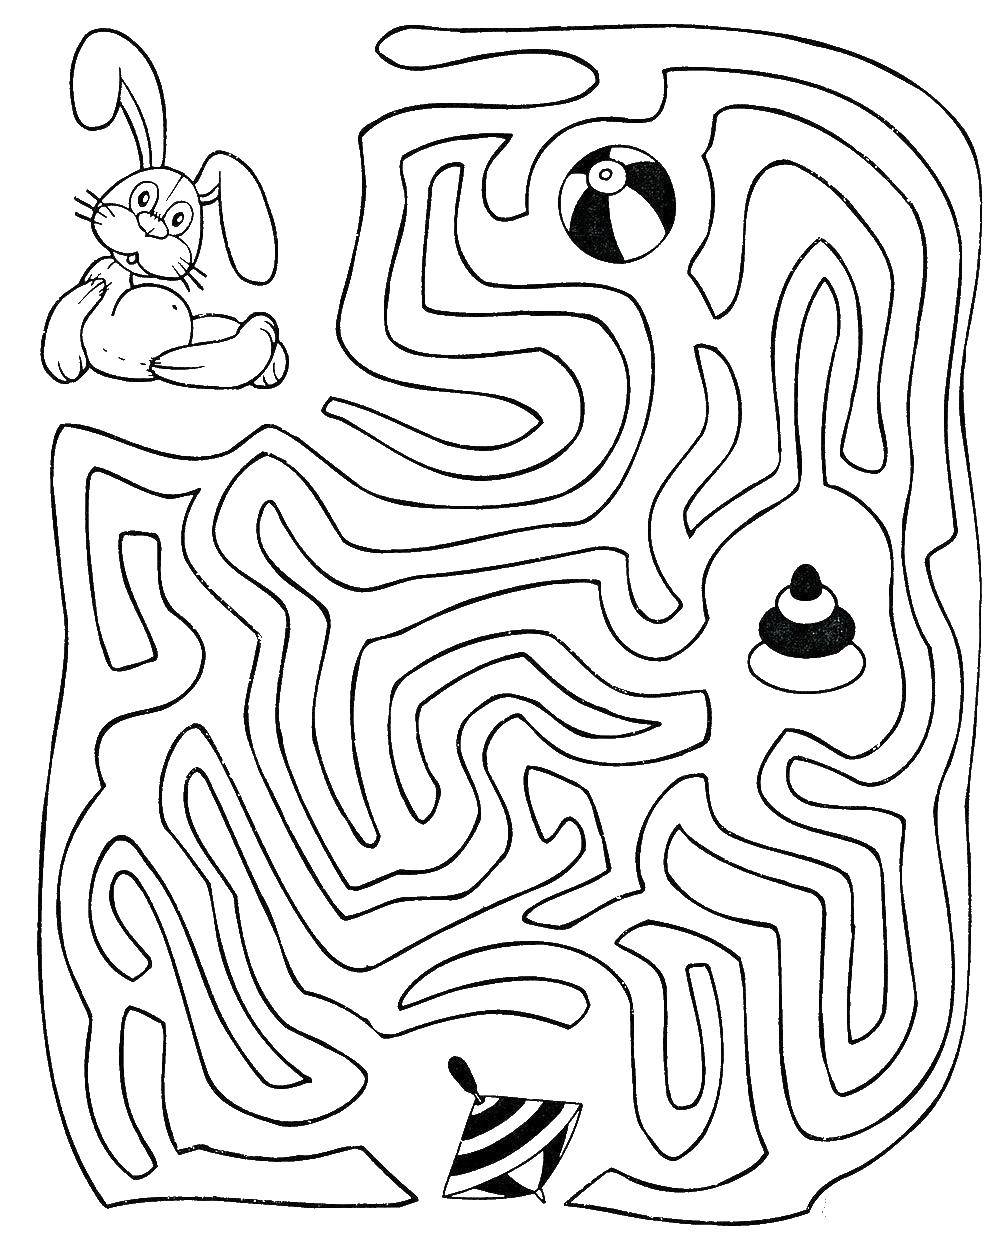 Coloring Help Bunny. Category Mazes. Tags:  Maze, logic.